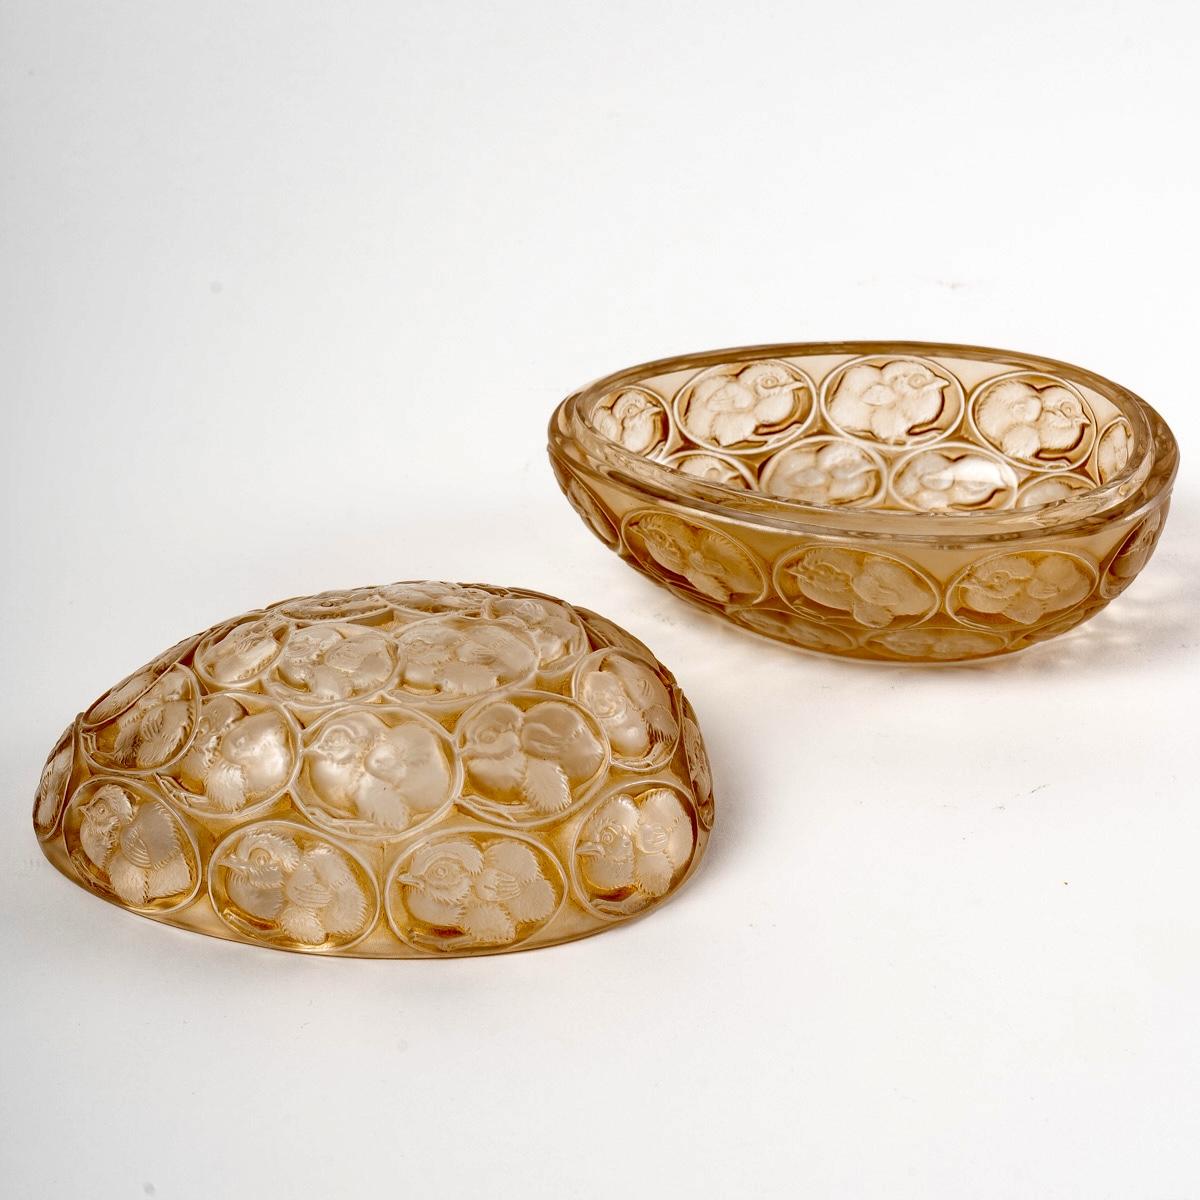 Molded 1929 René Lalique Poussins Egg Box Frosted Glass Sepia Patina, Chicks